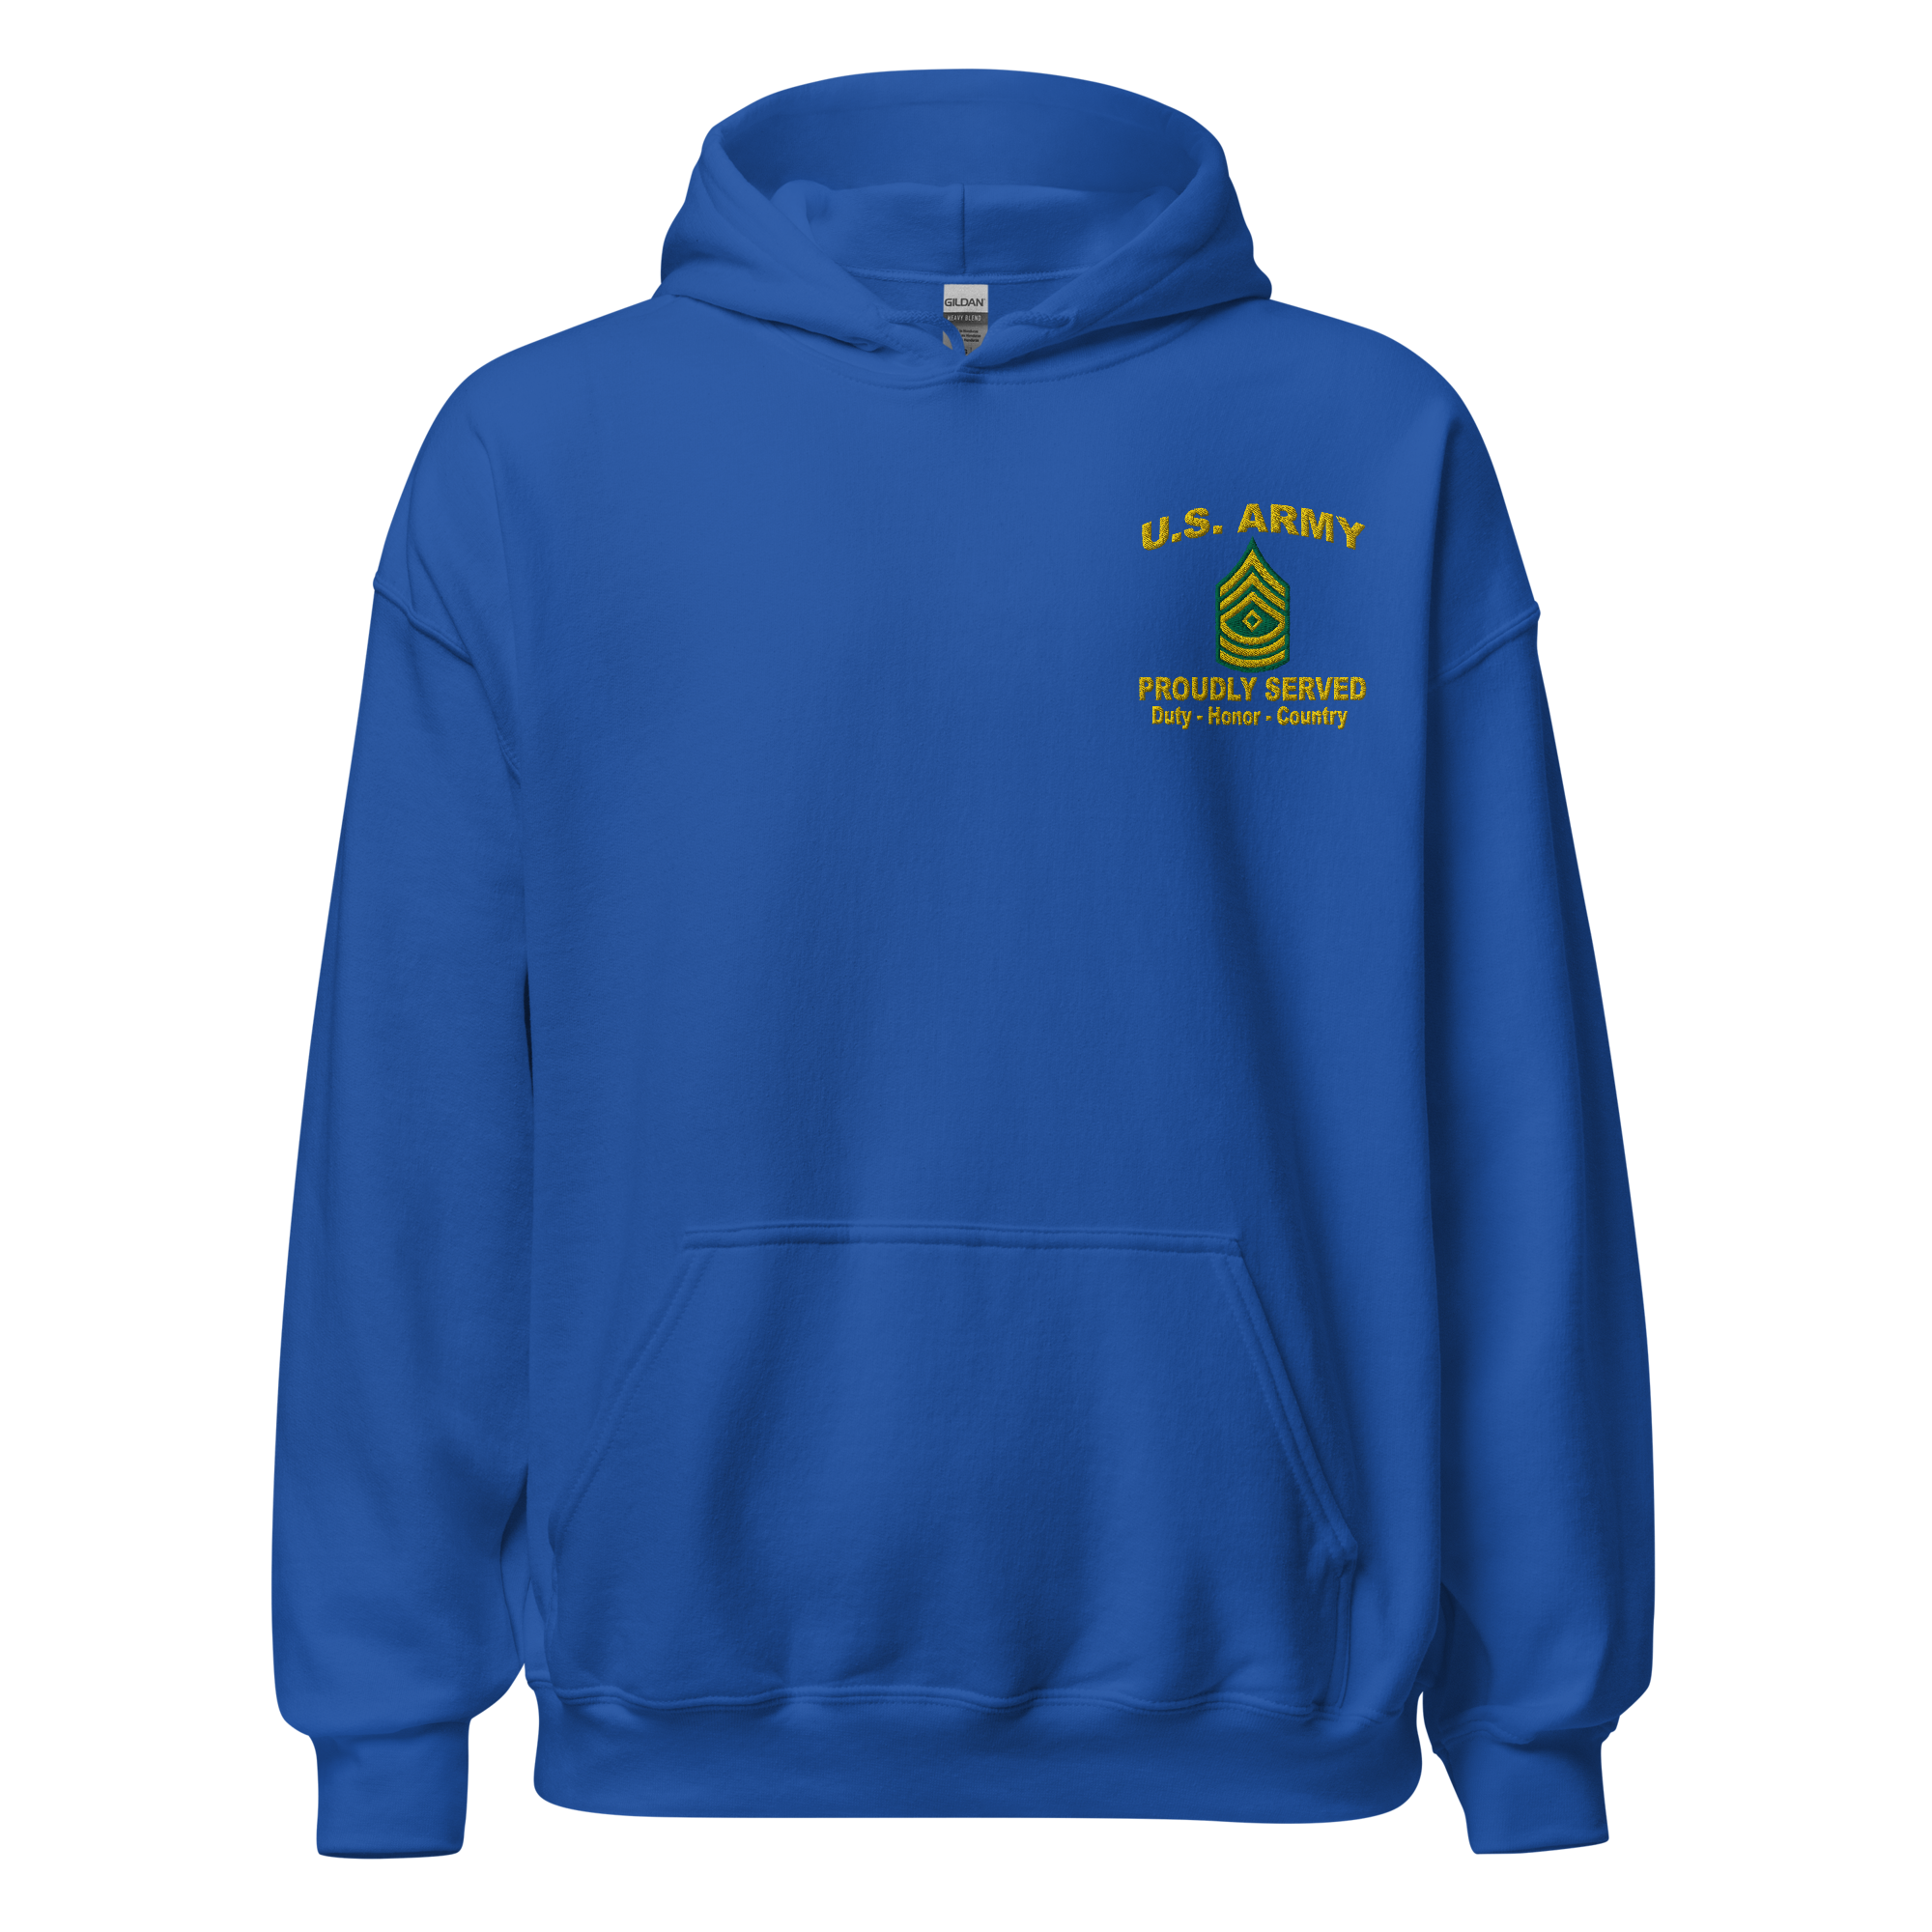 Custom US Army Ranks, Insignia Core Values Embroidered Unisex Hoodie